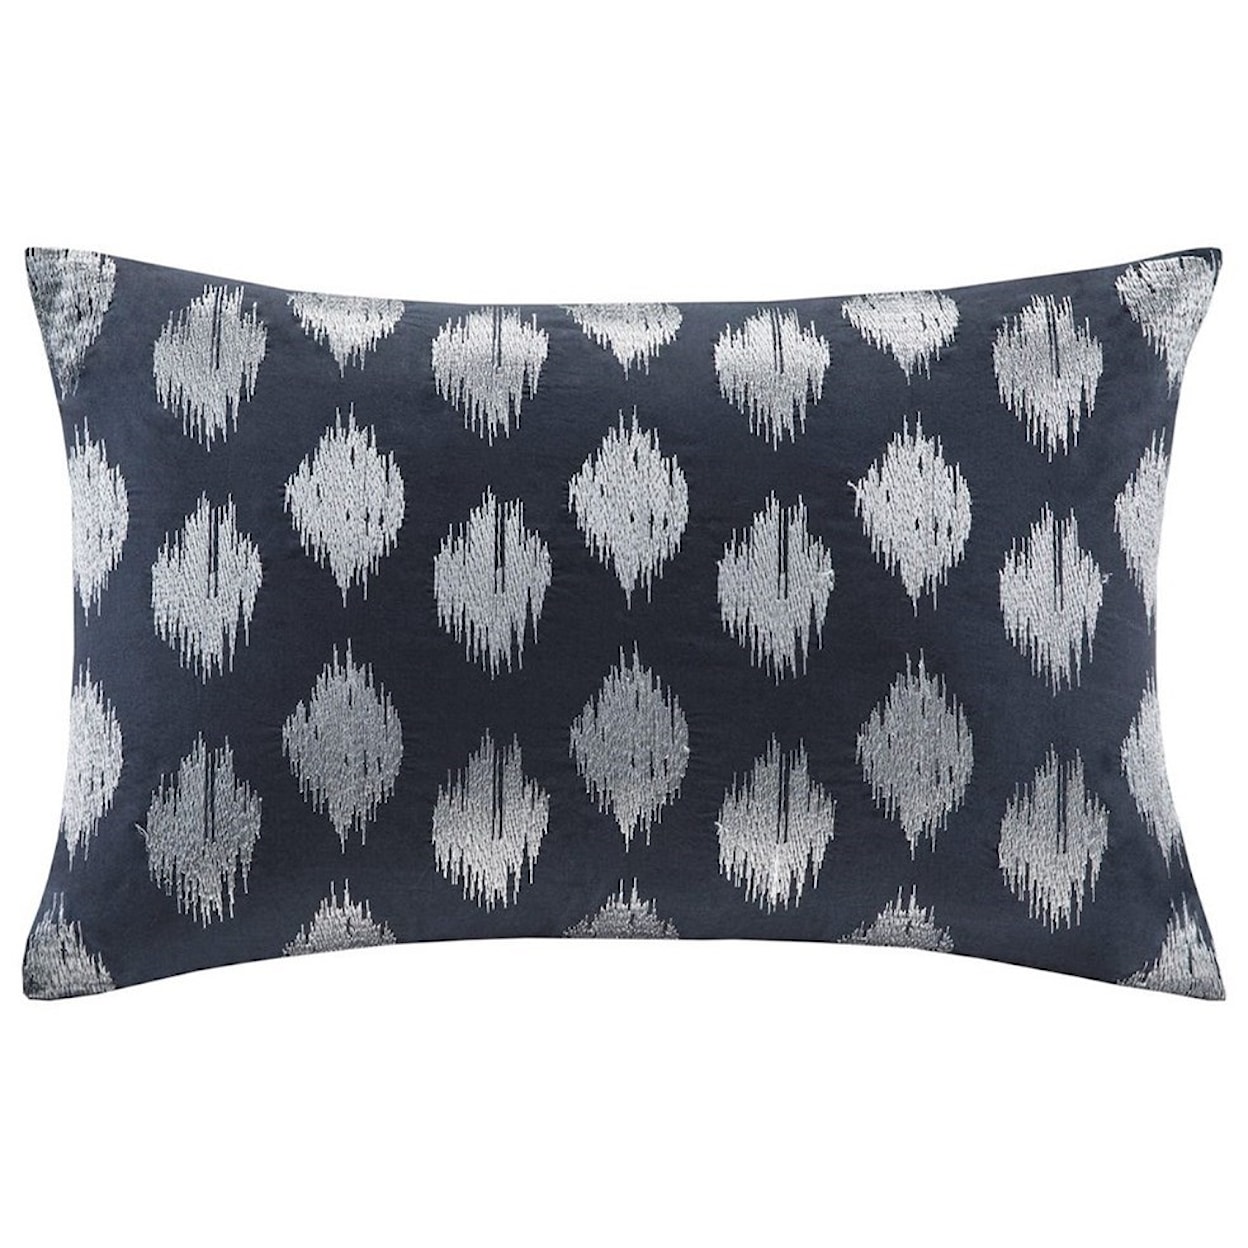 JLA Home Ink+Ivy Embroidered Oblong Pillow